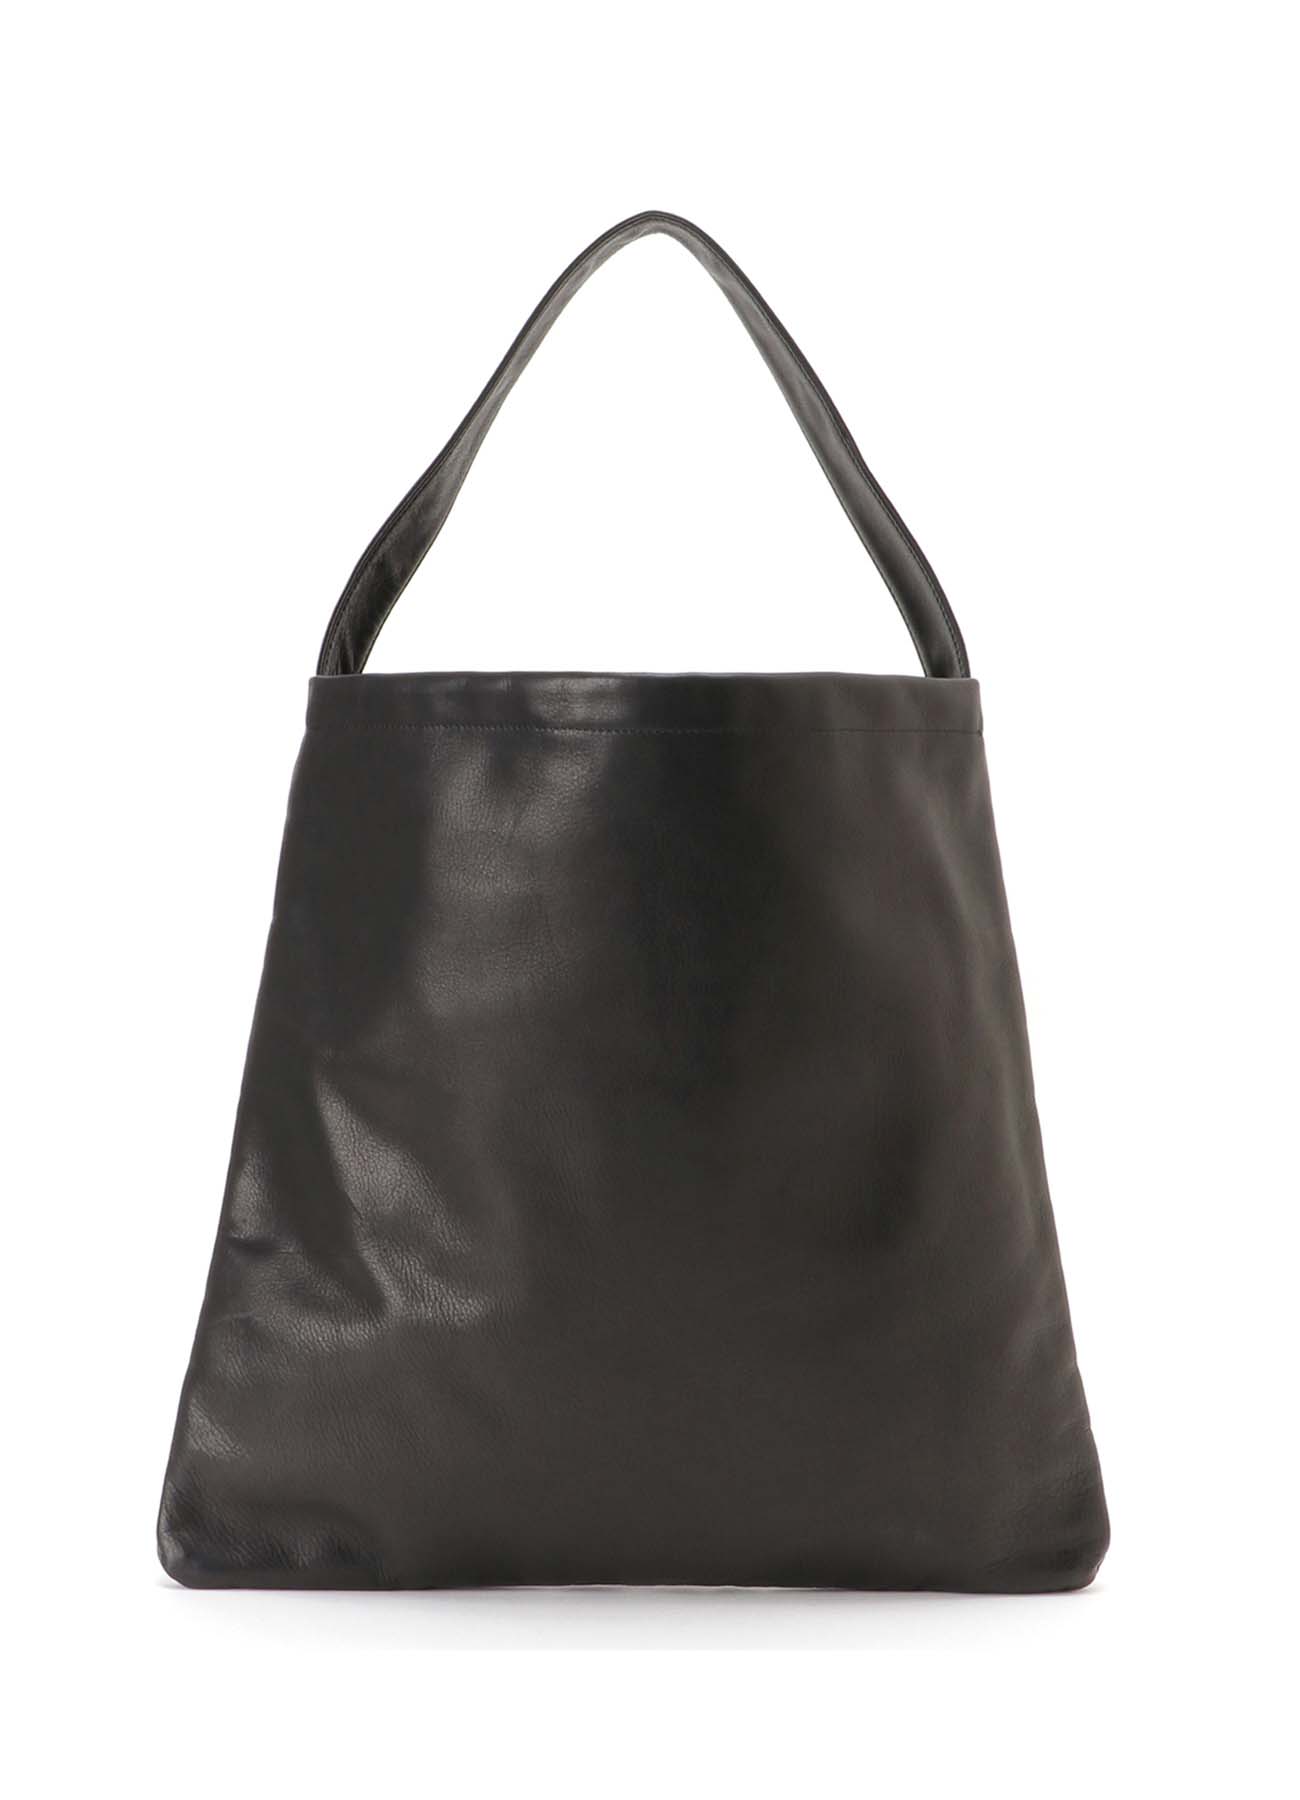 SOFT SMOOTH FLAT TOTE BAG